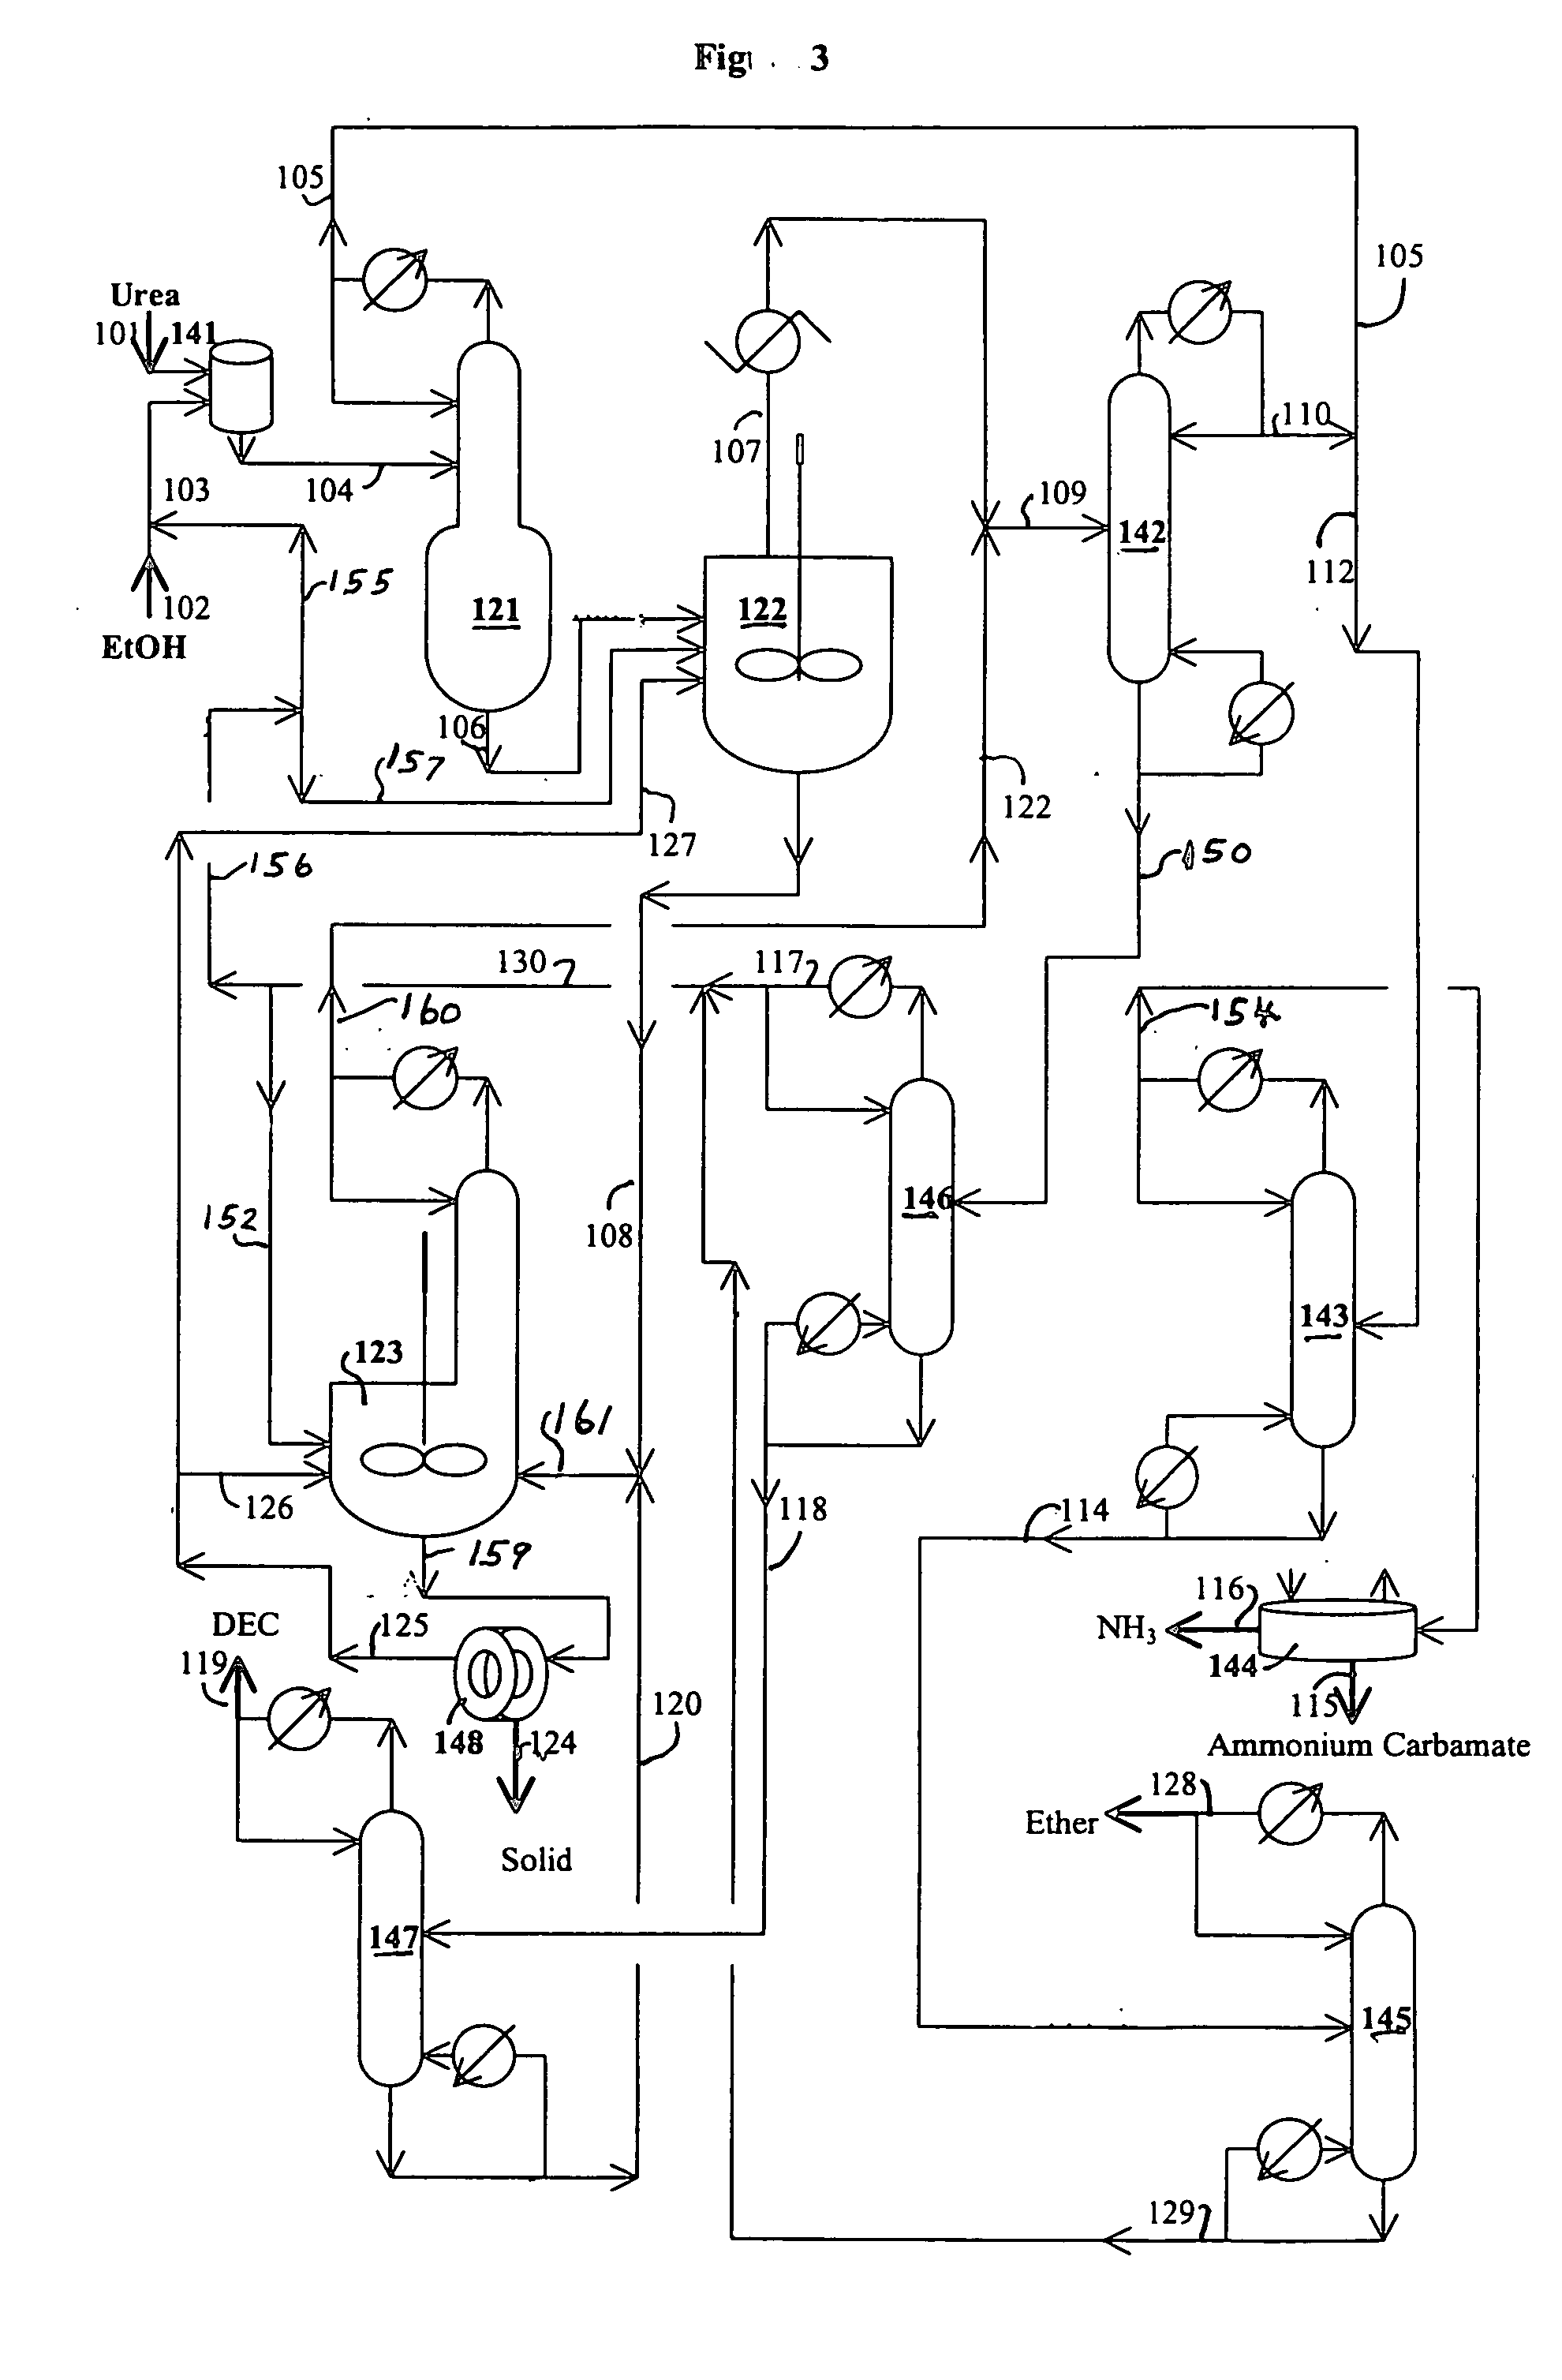 Process for making dialkyl carbonates